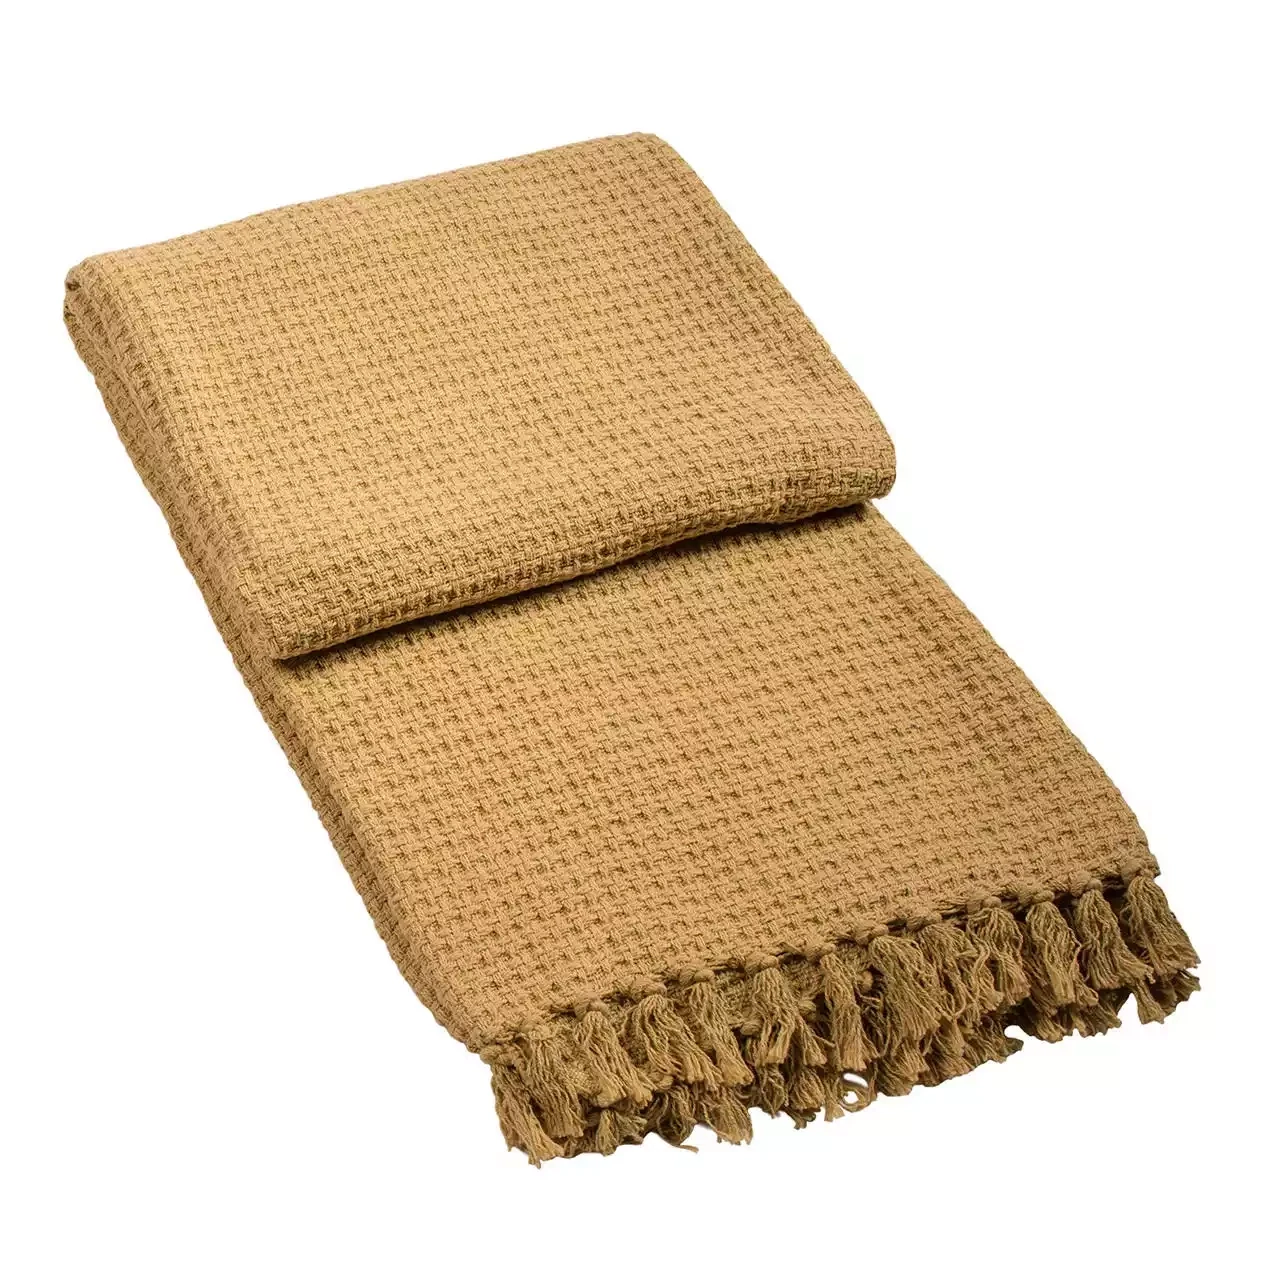 Cotton Waffle Throw With Tassels - 130x170cm - Old Gold by Namaste